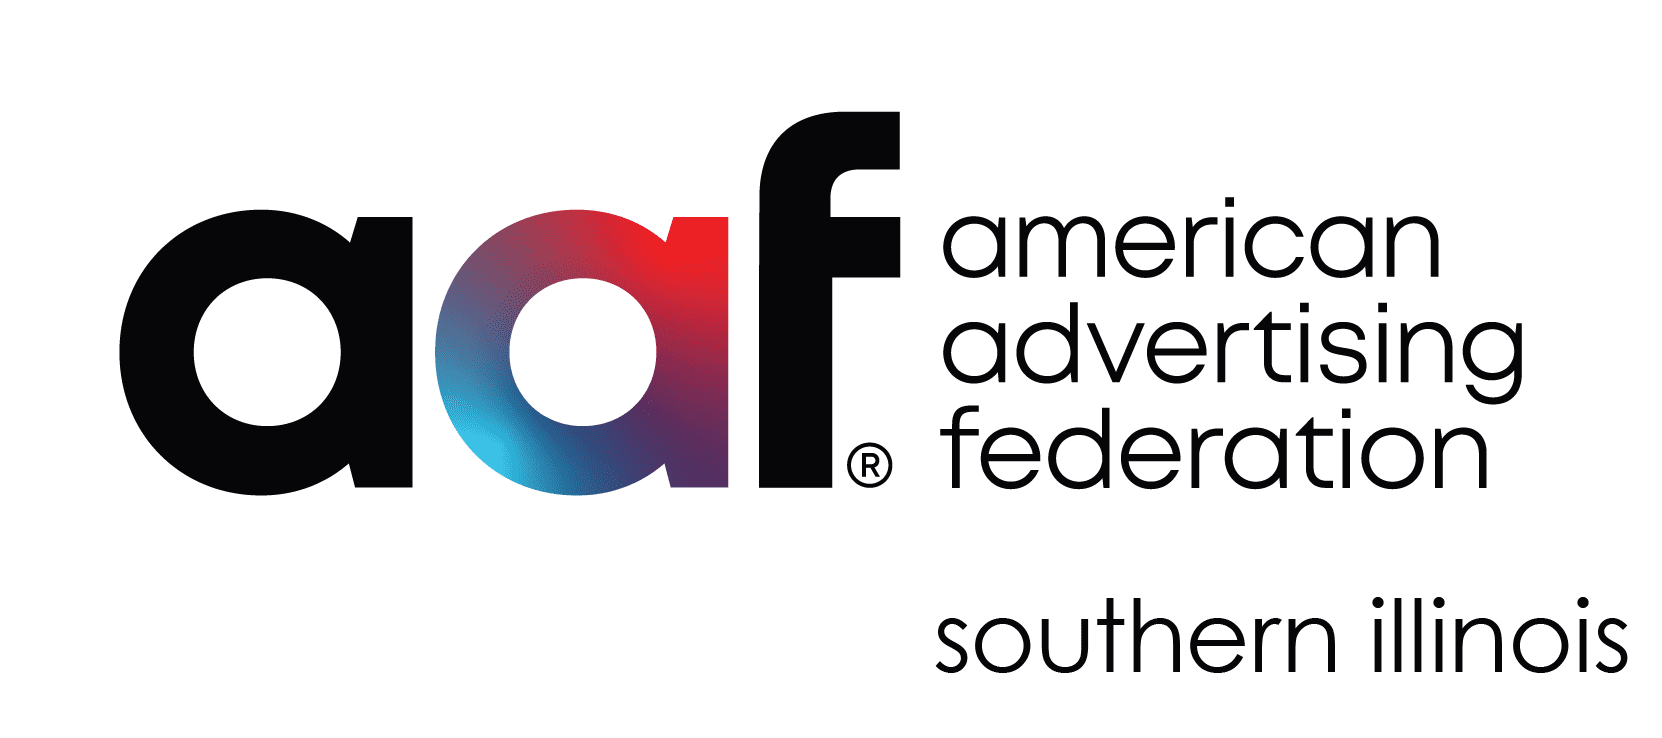 American Advertising Federation-Southern Illinois Chapter